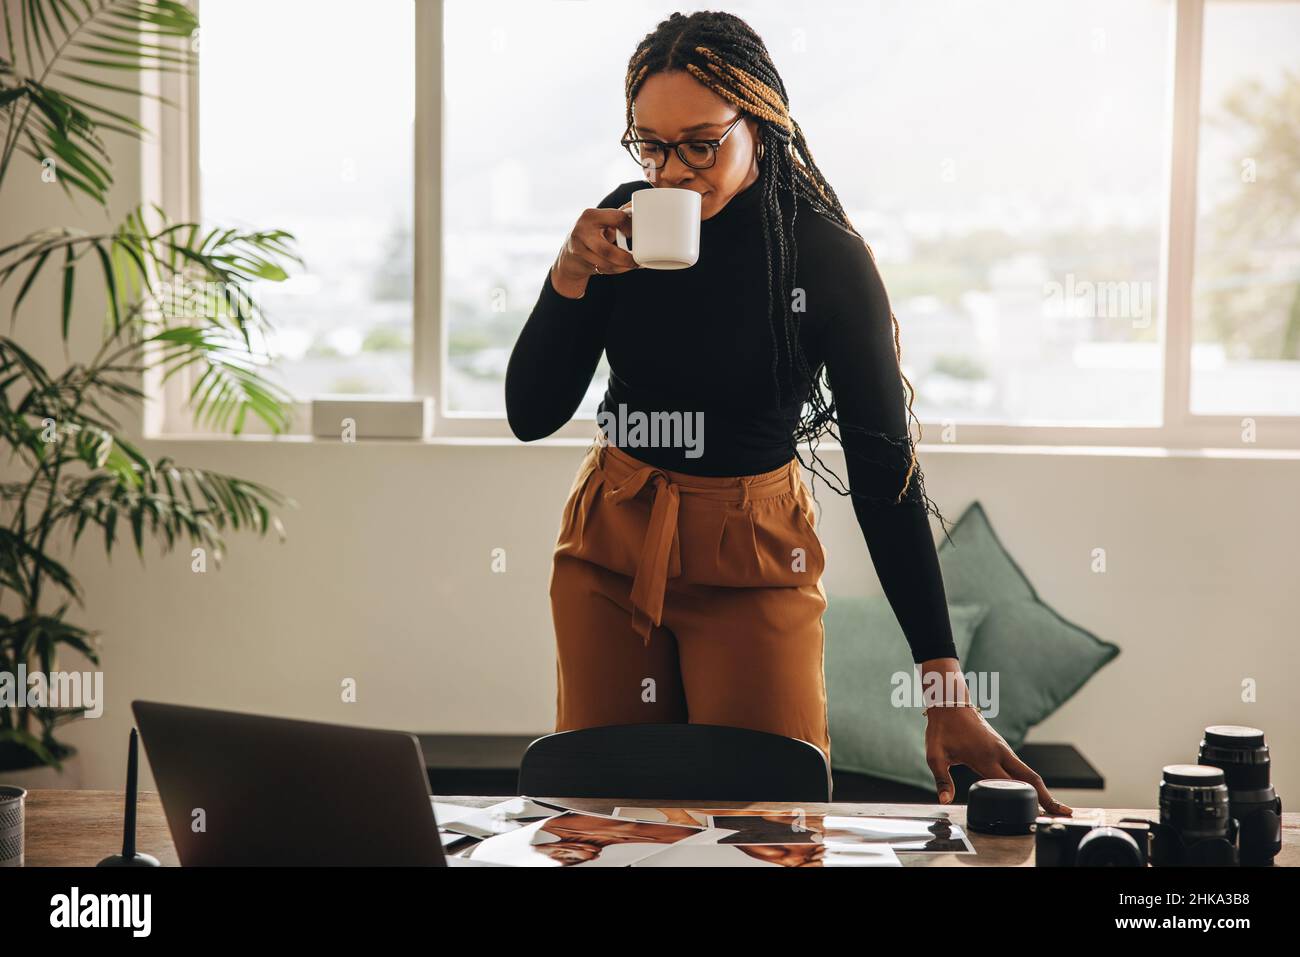 Self-employed young woman drinking coffee in her home office. Creative young woman standing at a desk with photographic equipment. Female photographer Stock Photo